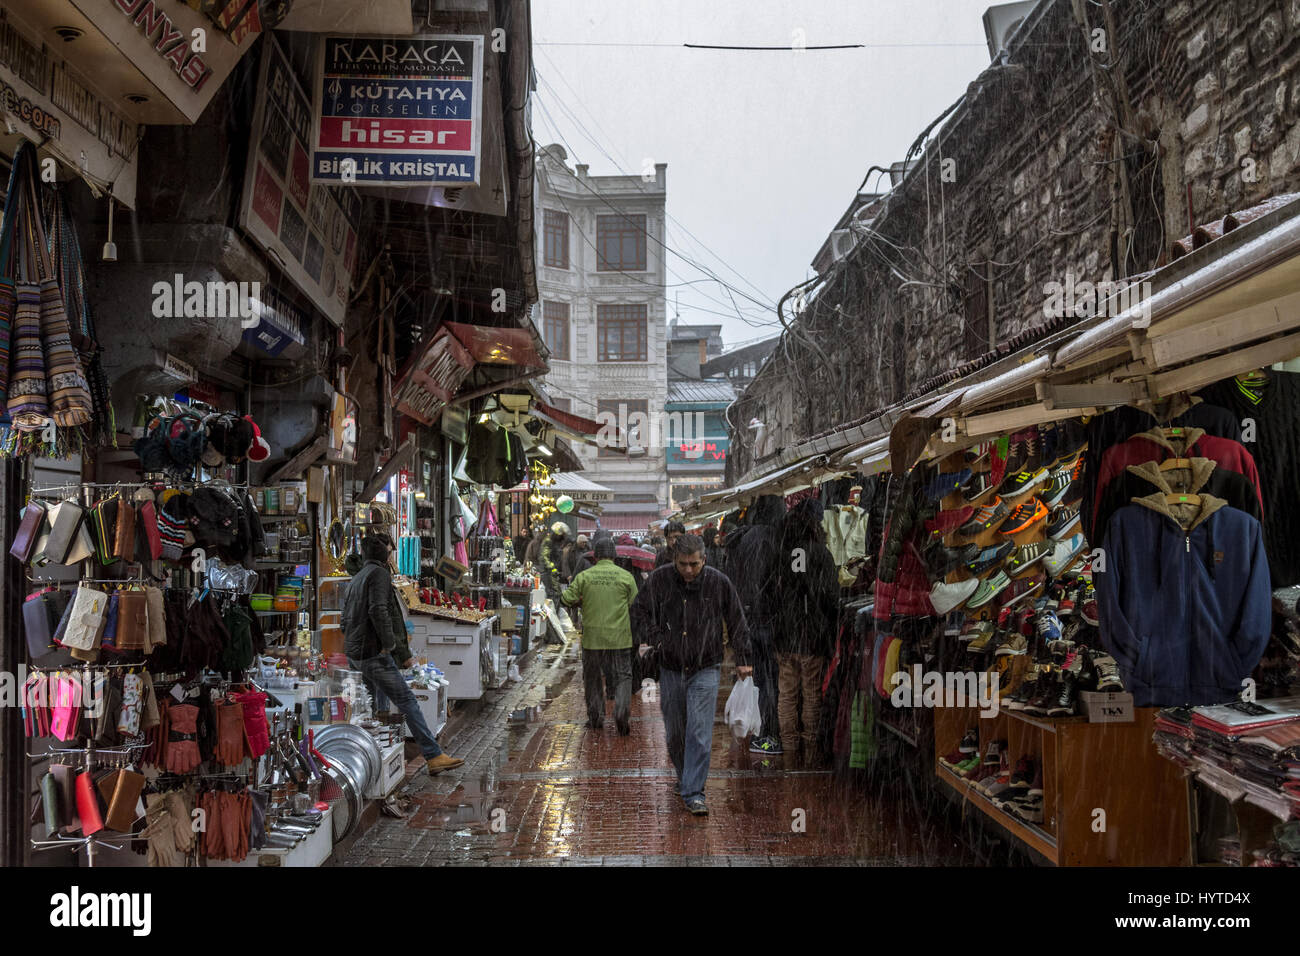 ISTANBUL, TURKEY - DECEMBER 30, 2015: Snow storm hitting a typical Istanbul street near the Spice market   Picture of a snow storm over a typical baza Stock Photo